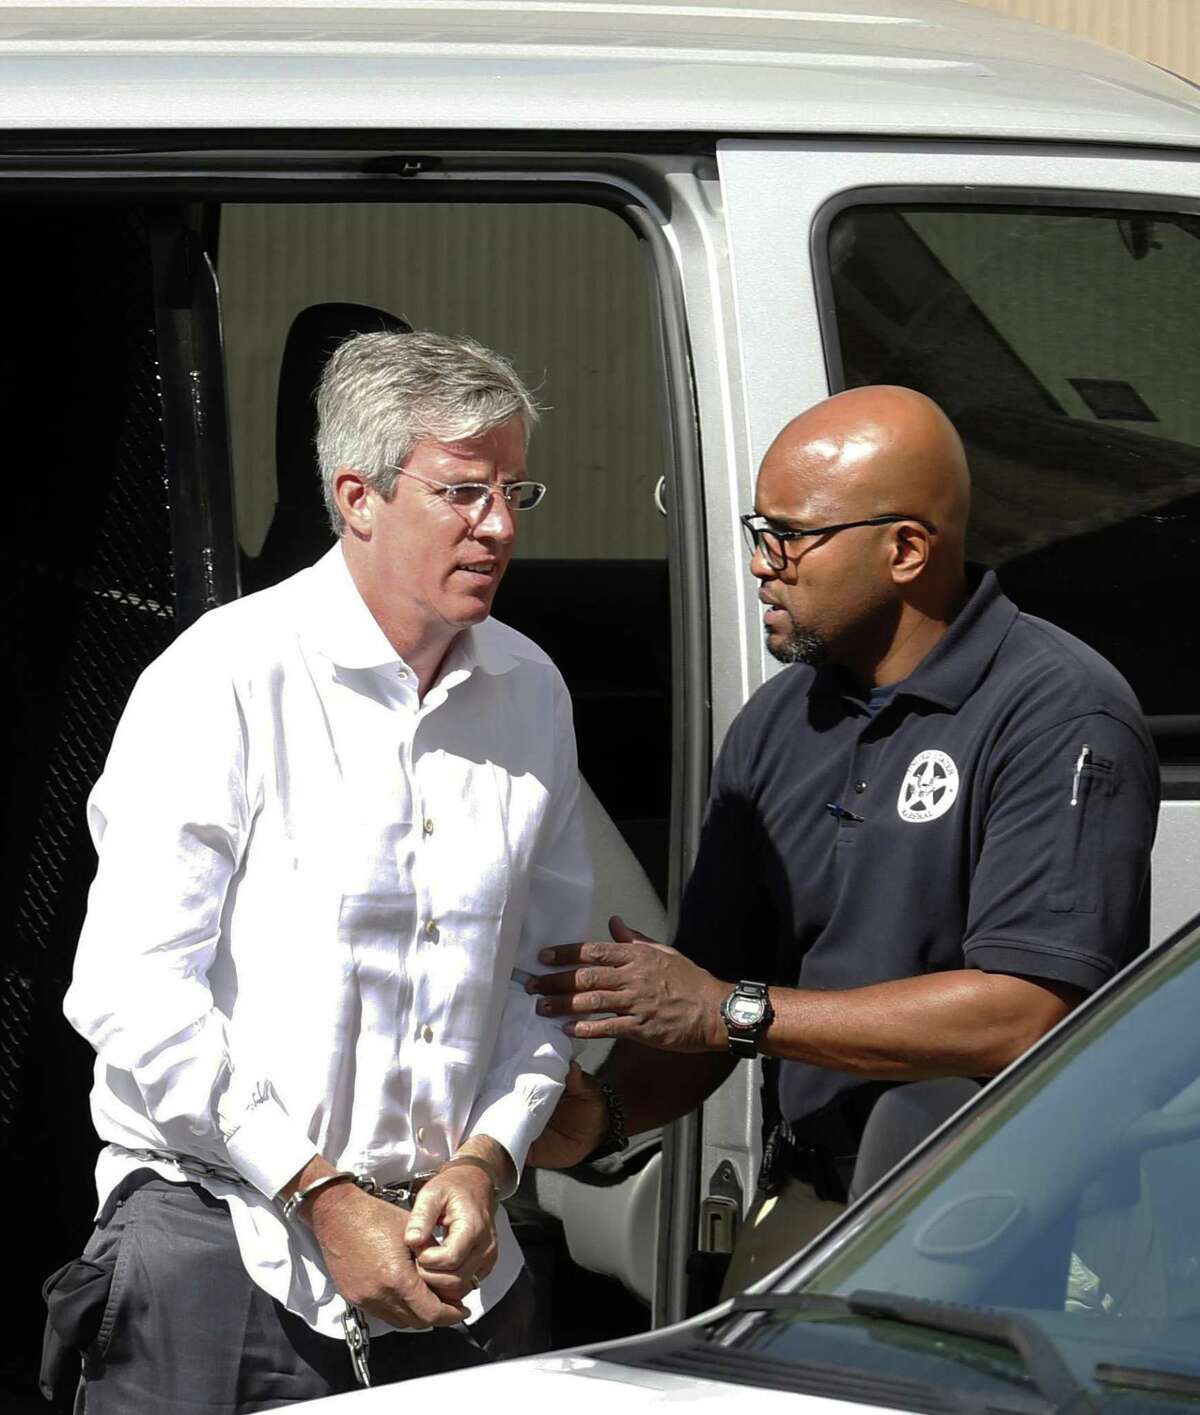 Tim Duncan's former financial adviser, Charles Banks, is transported to federal court early Friday morning after he turned himself in on federal charges. Banks was apparently indicted this week in connection with allegations that he duped Duncan into making certain investments, losing between $1.1 million and $25 million of Duncan's money. Photos taken on Friday, September 9, 2016.